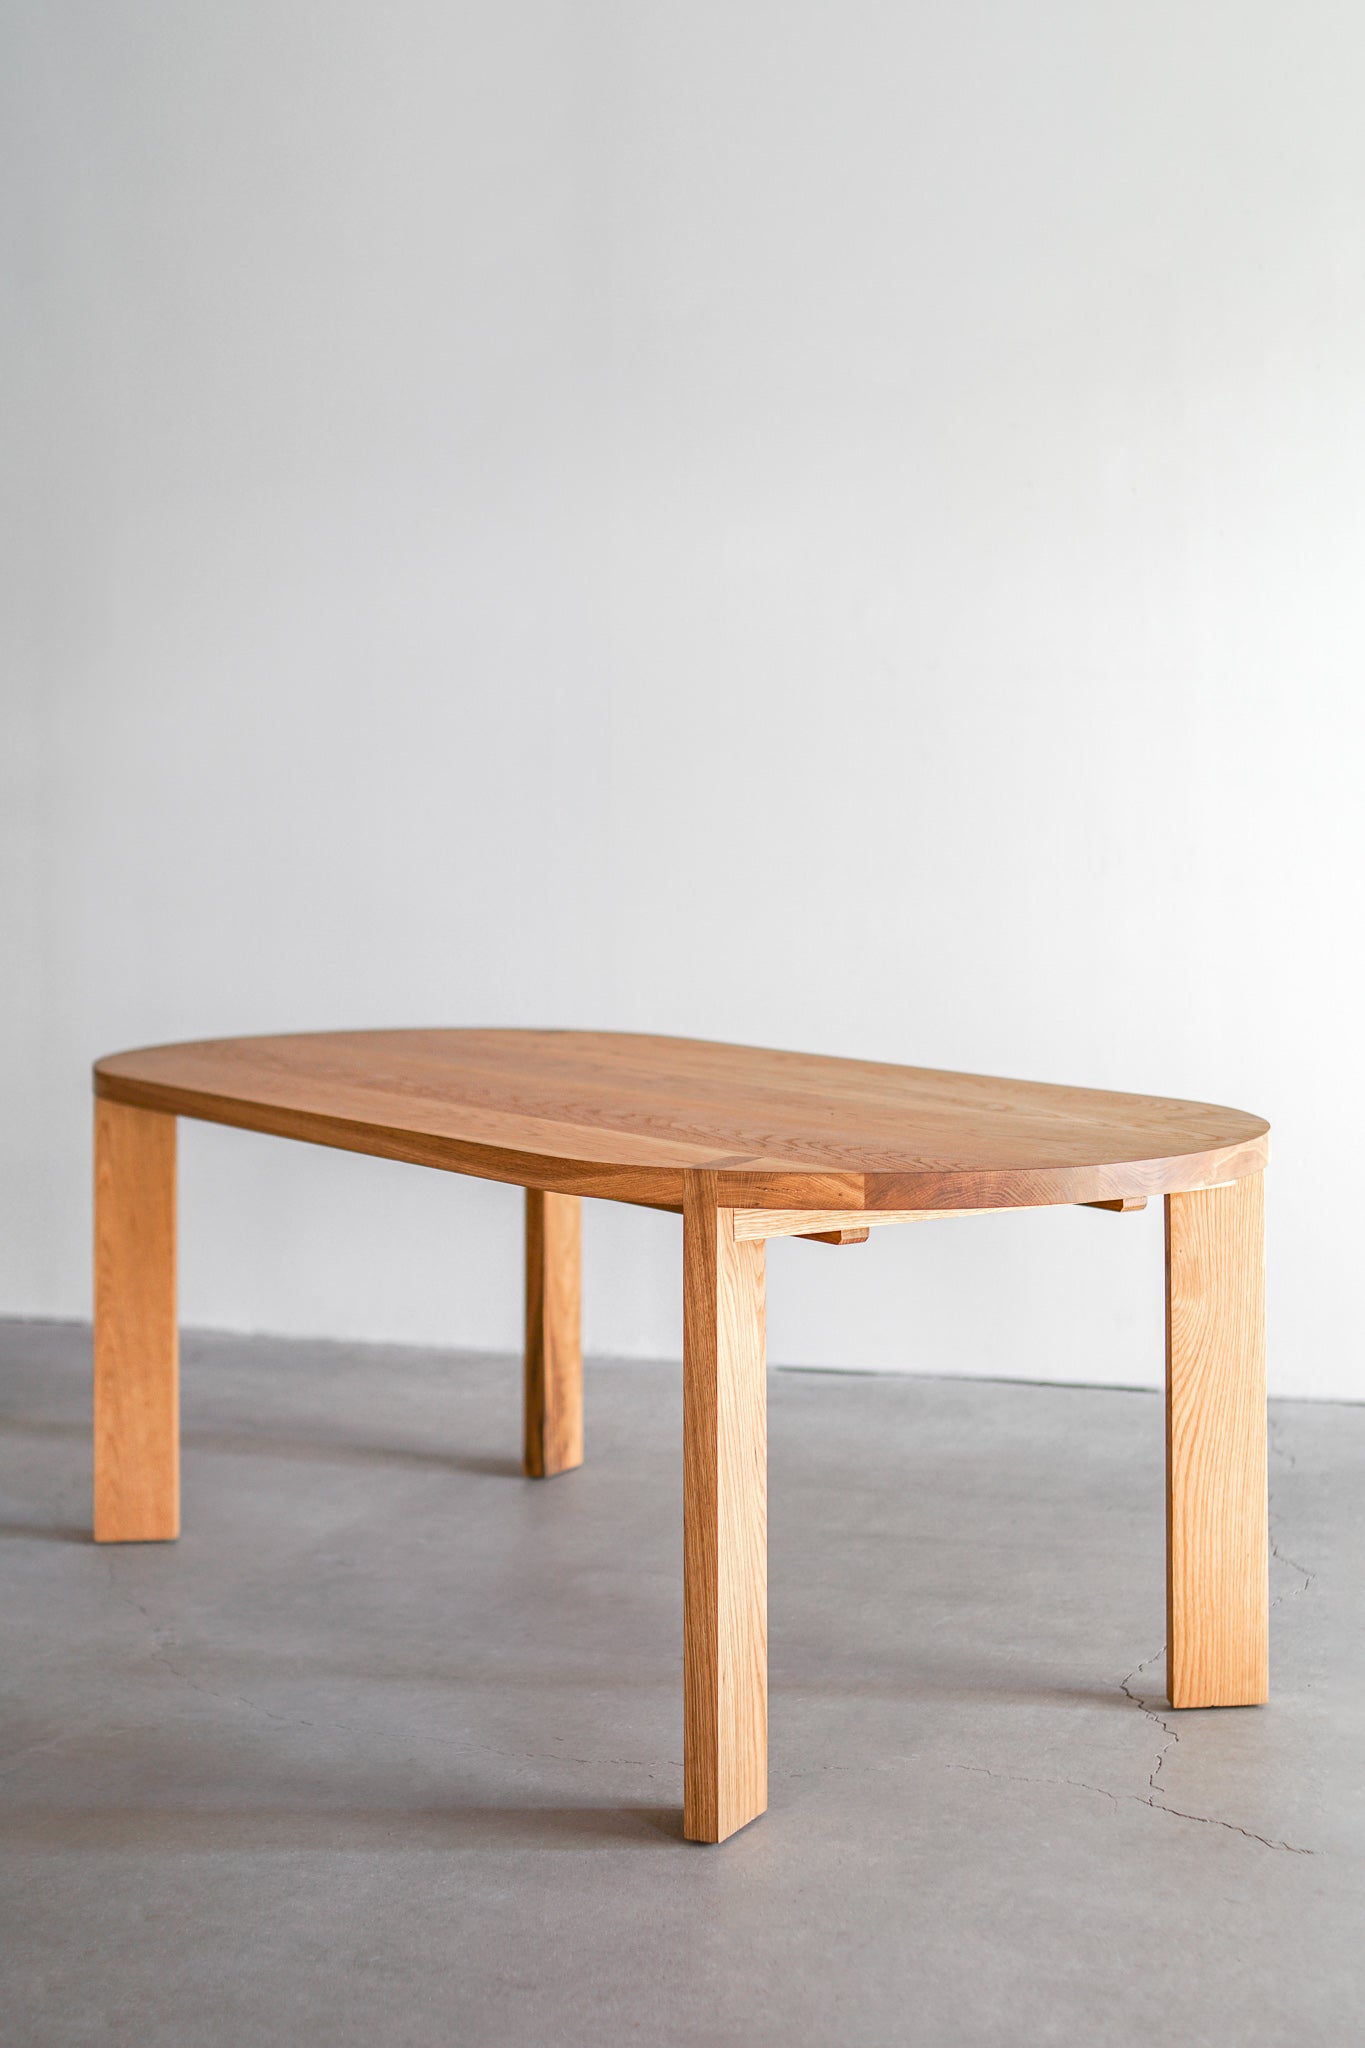 Morro dining table - full wood table 